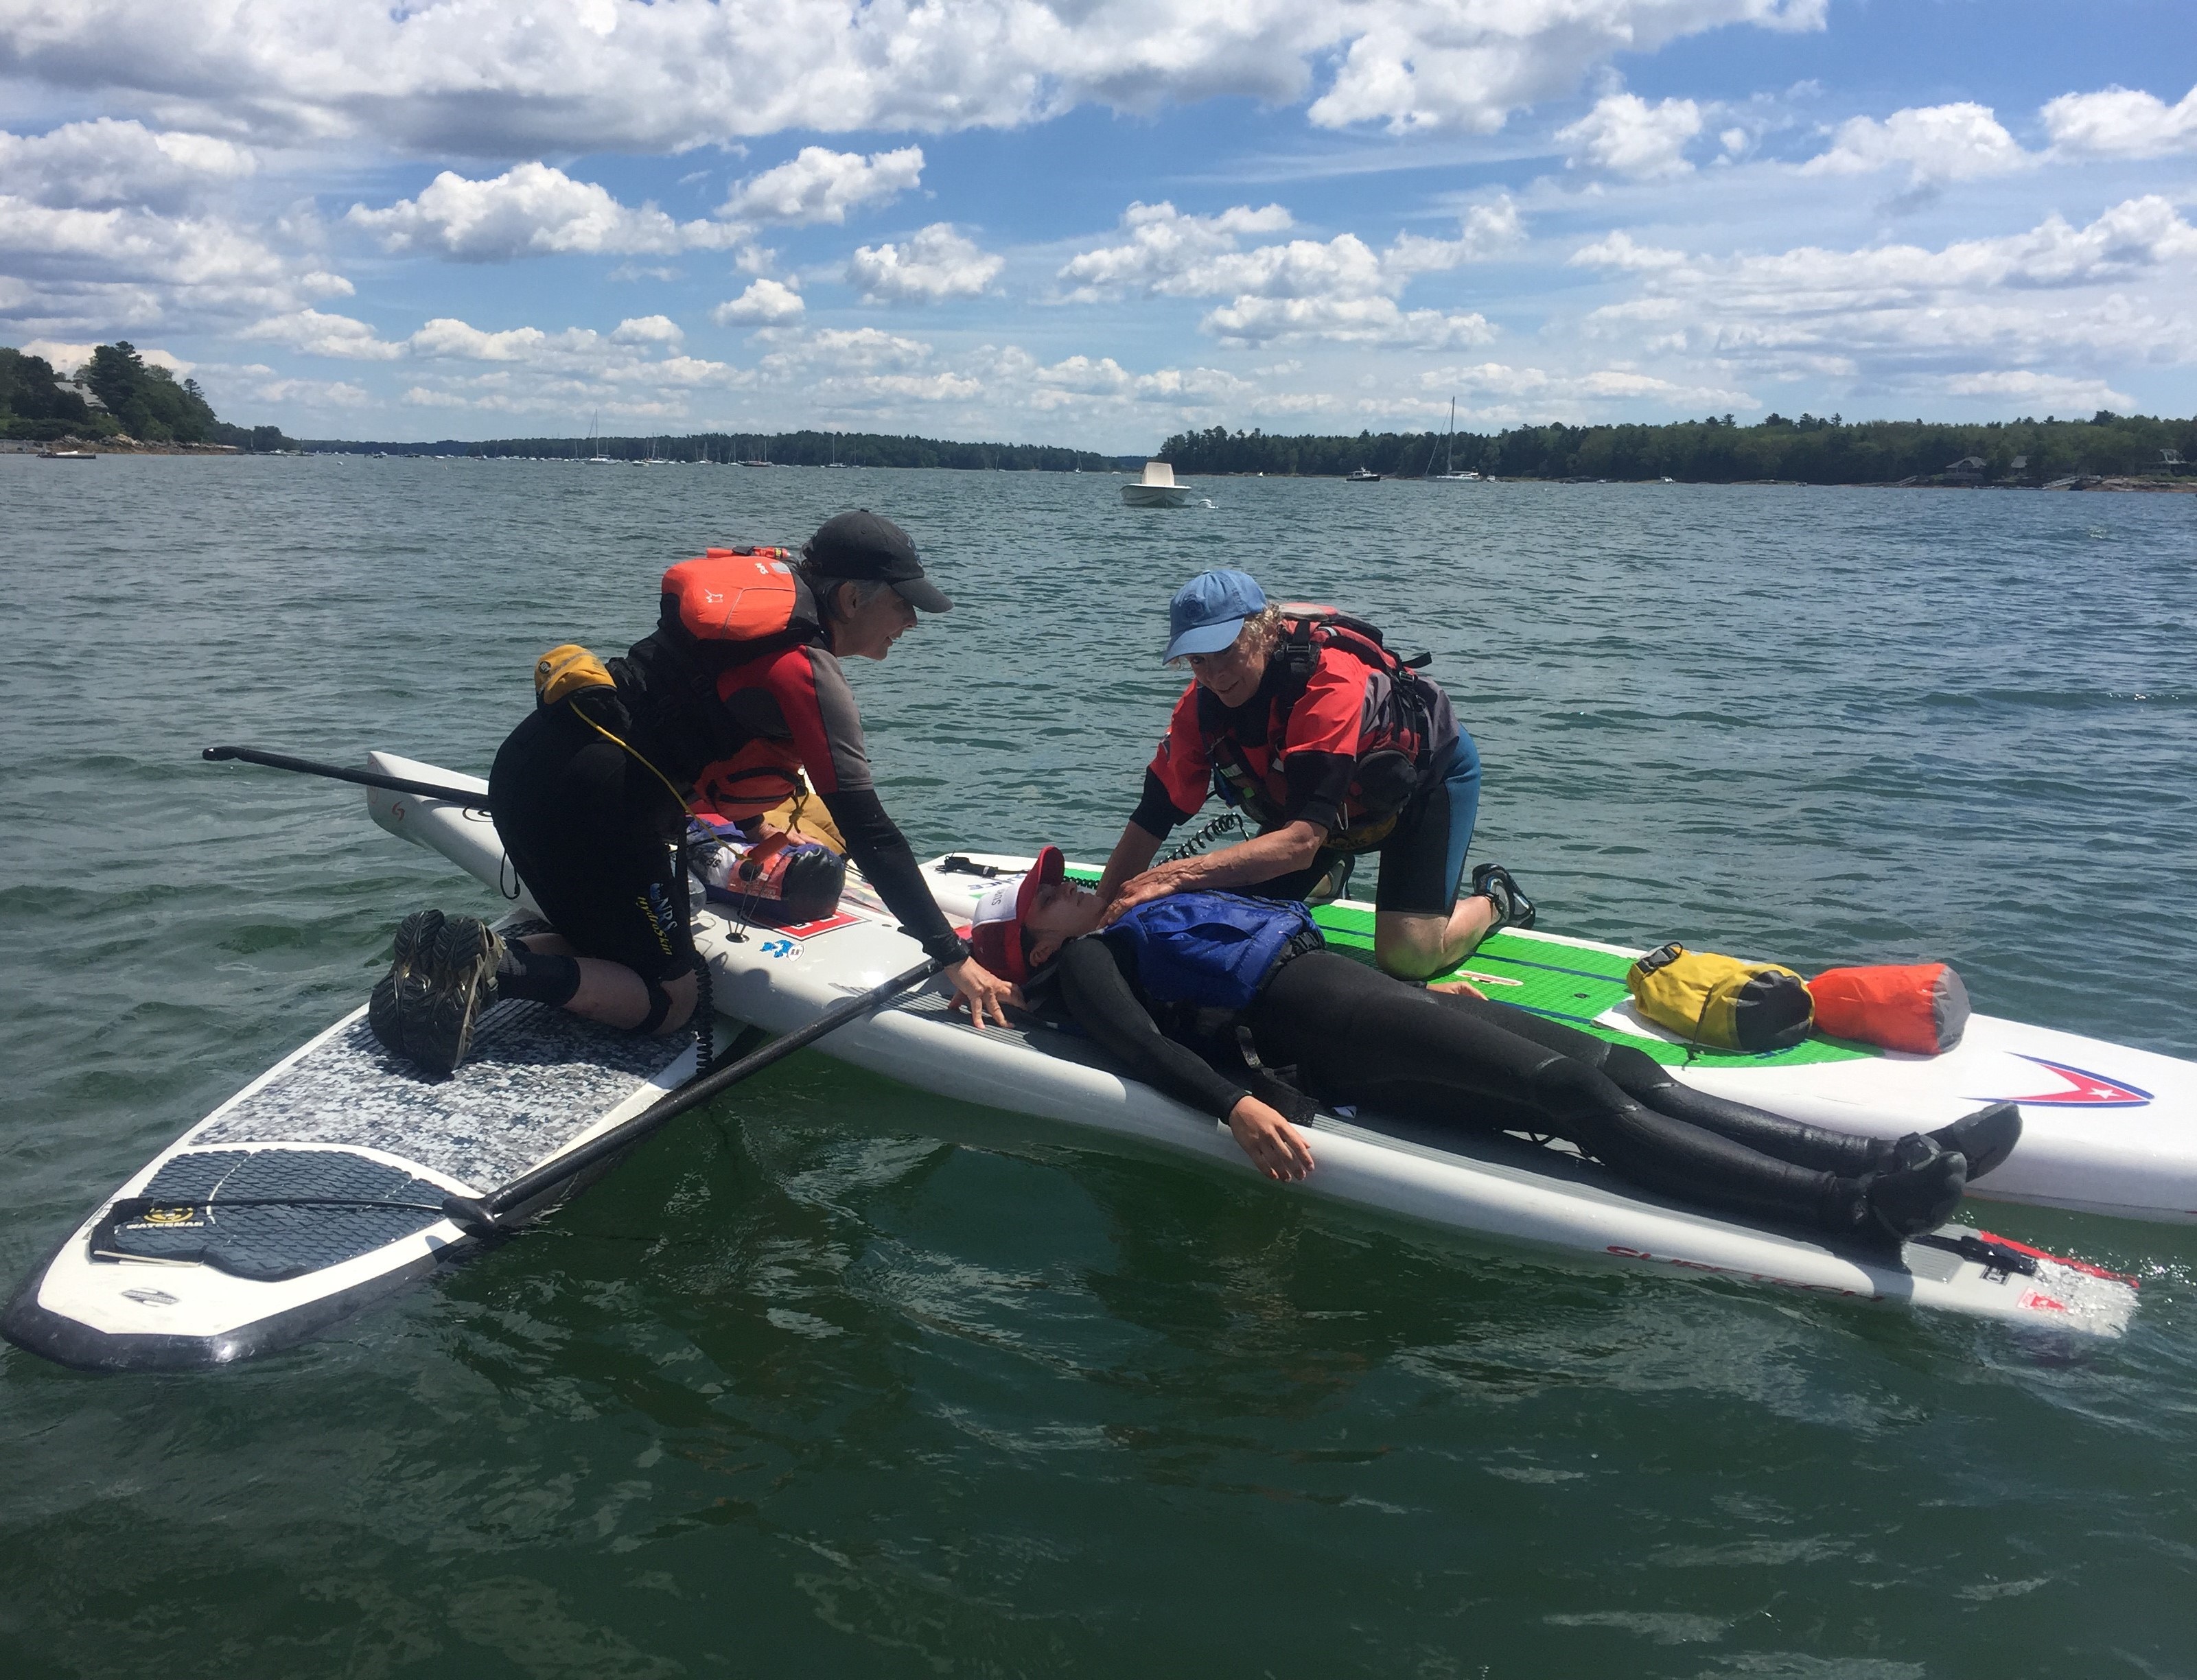 practicing first aid while on stand-up paddleboard